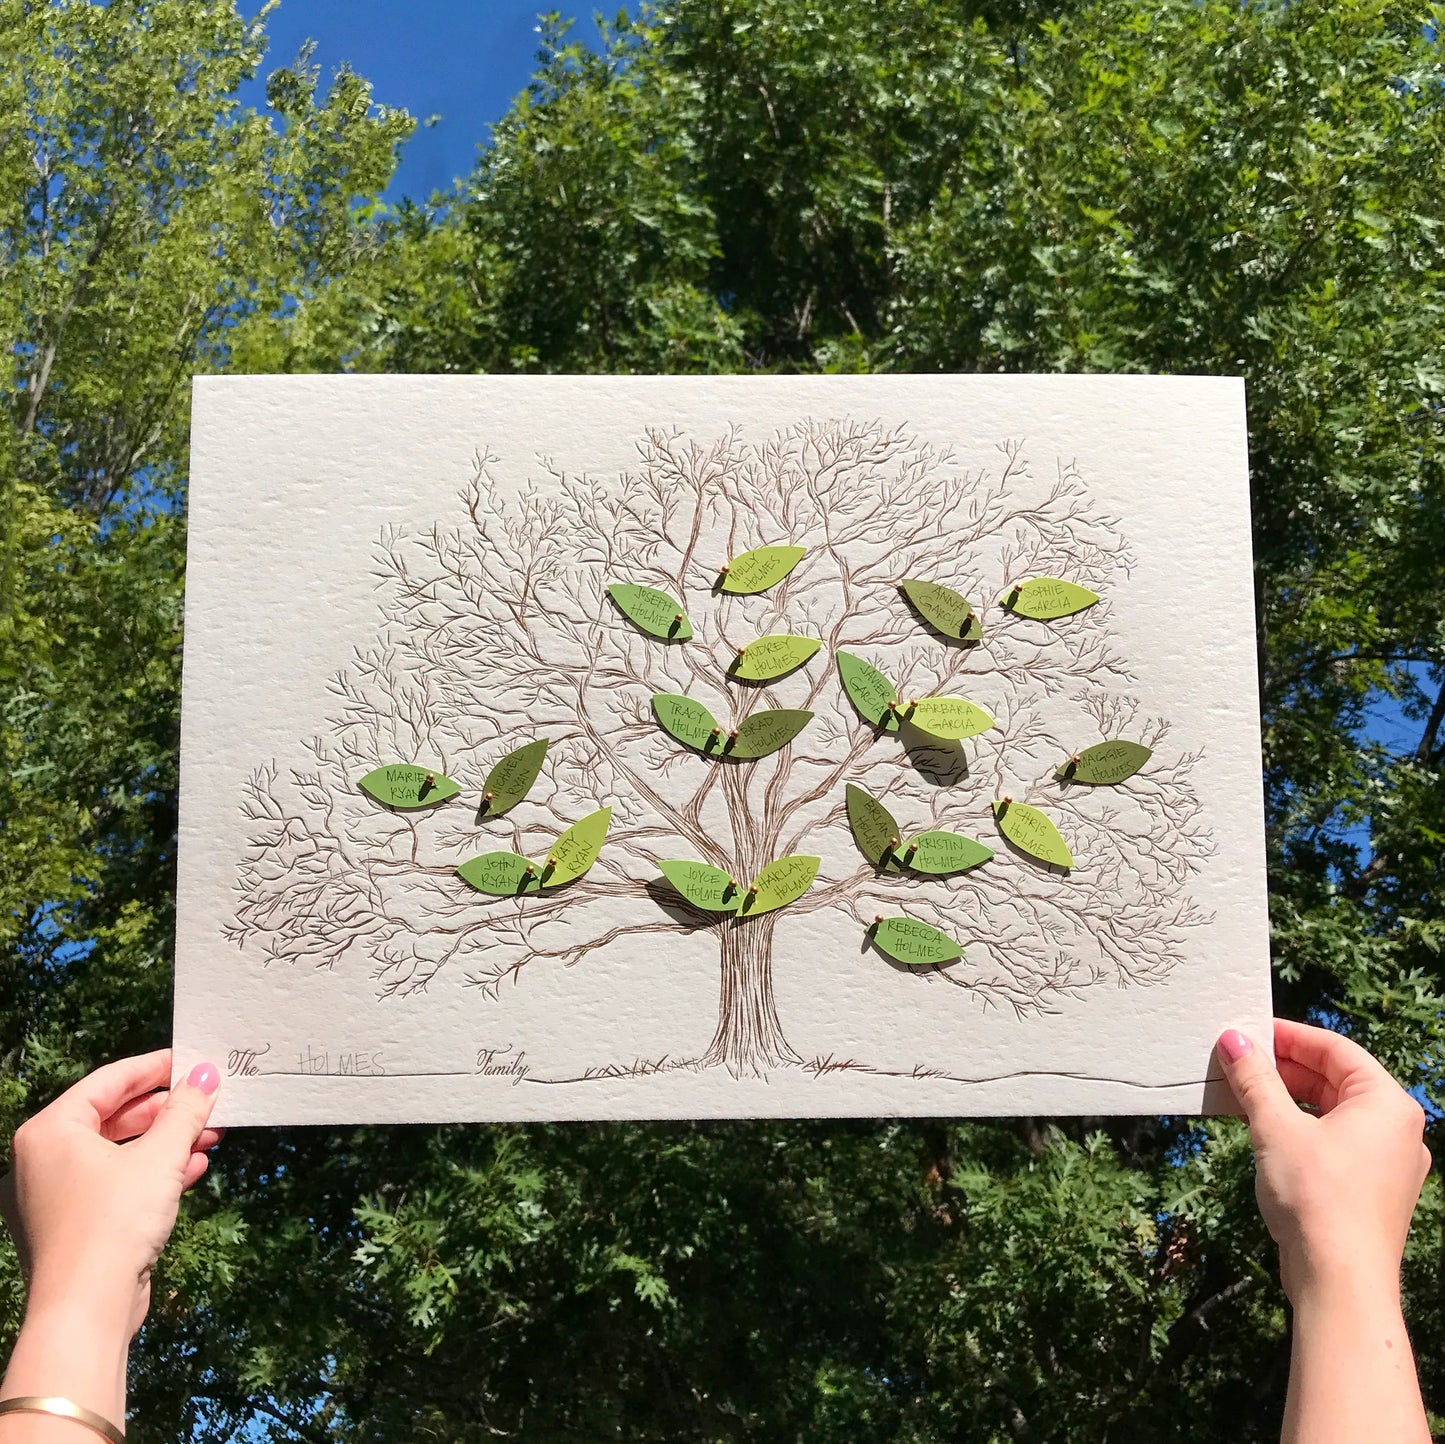 Make Your Own Family Tree